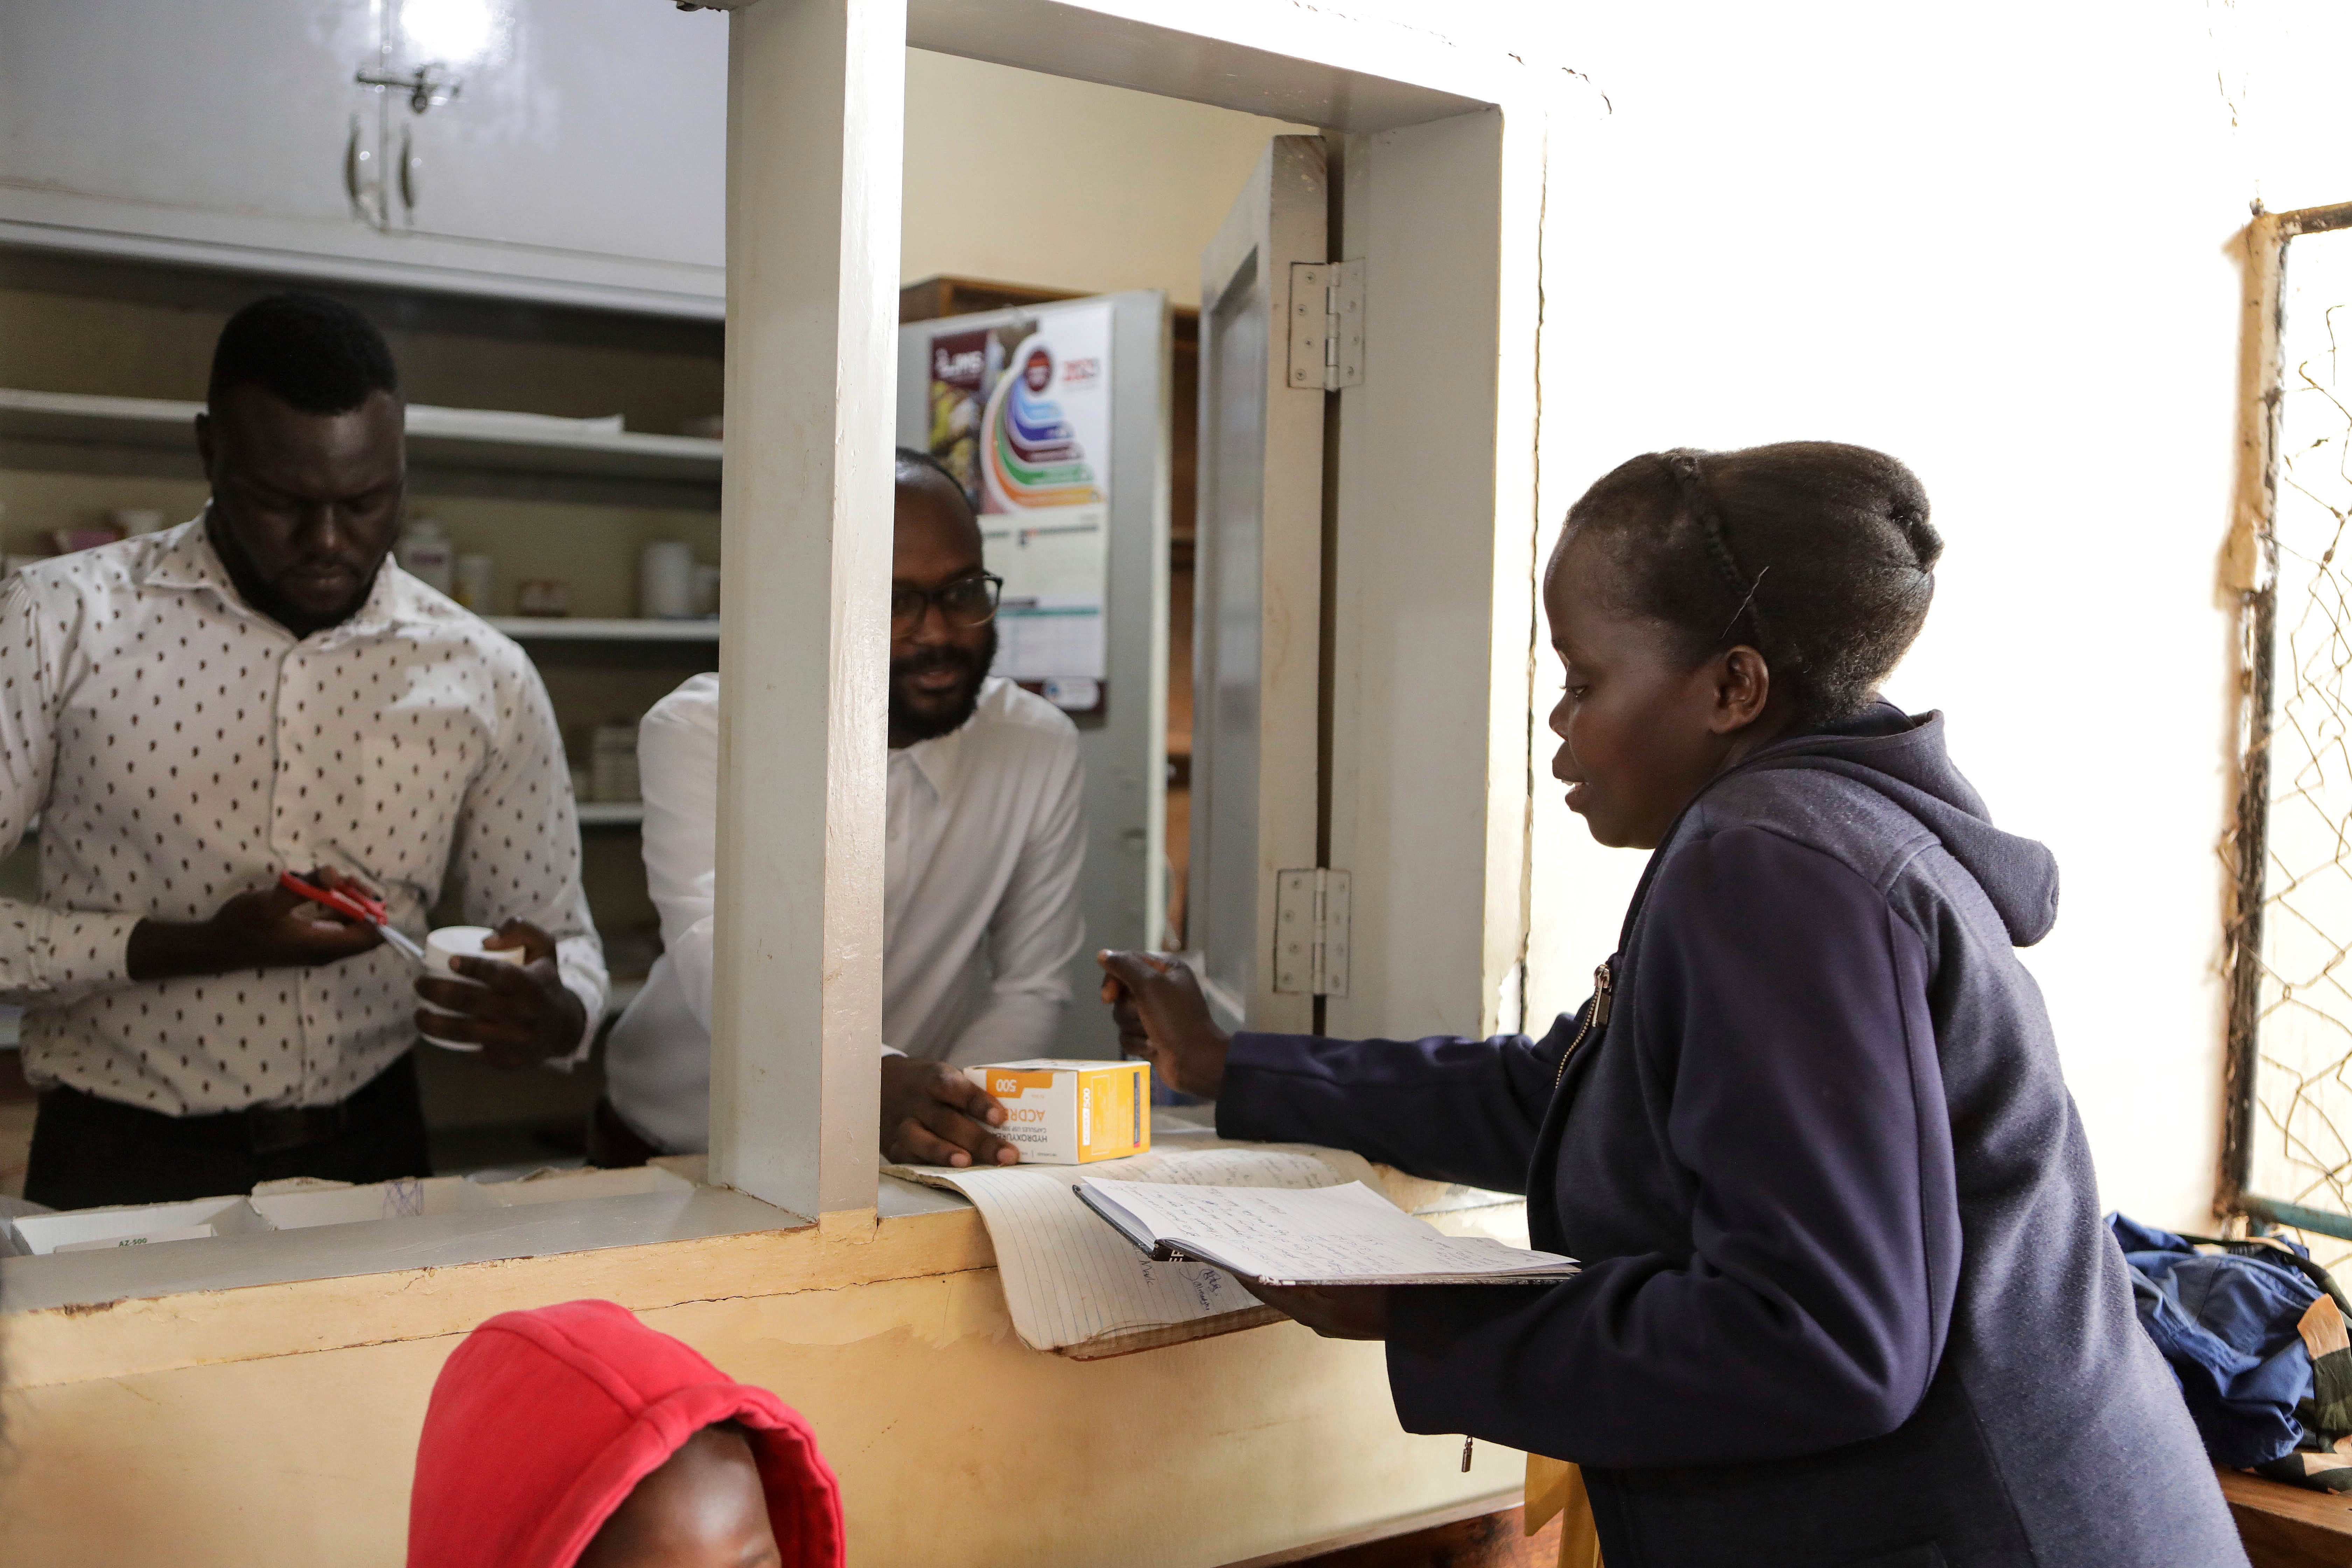 Barbara Nabulo picks her sickle cell prescription at the Mbale Regional Referral Hospital pharmacy counter, in Mbale, Uganda